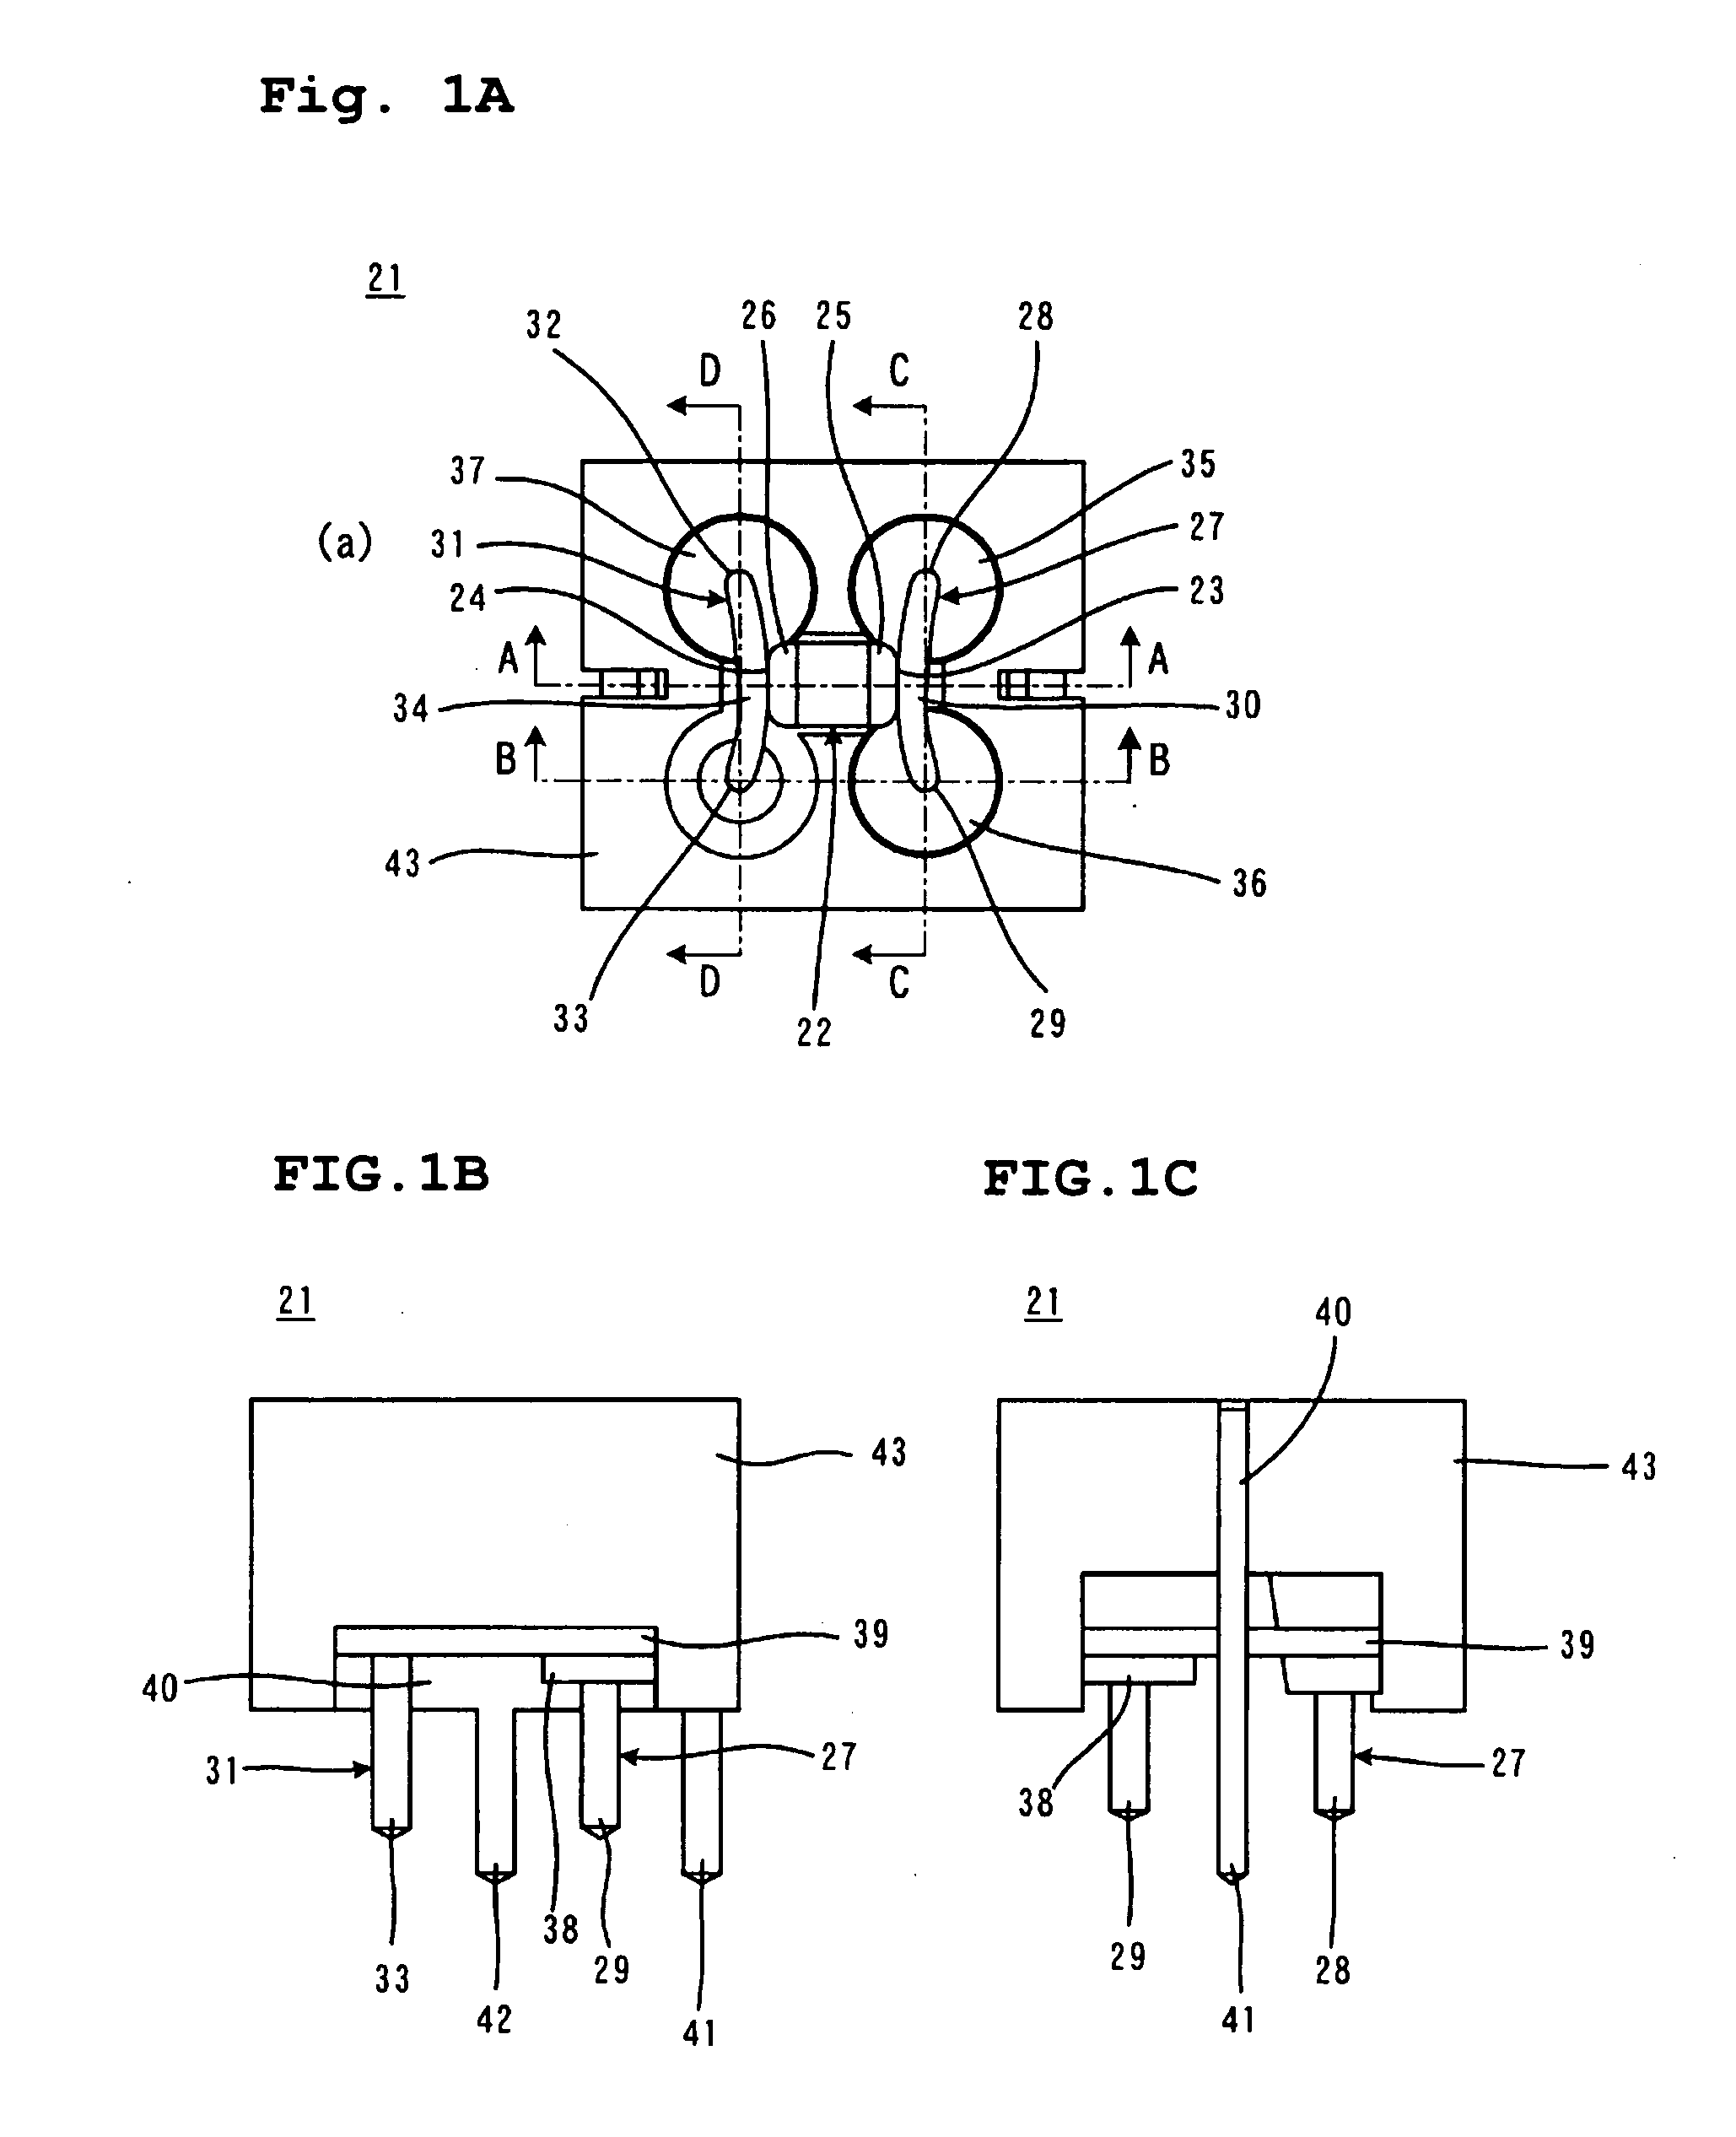 Noise filter mounting structure